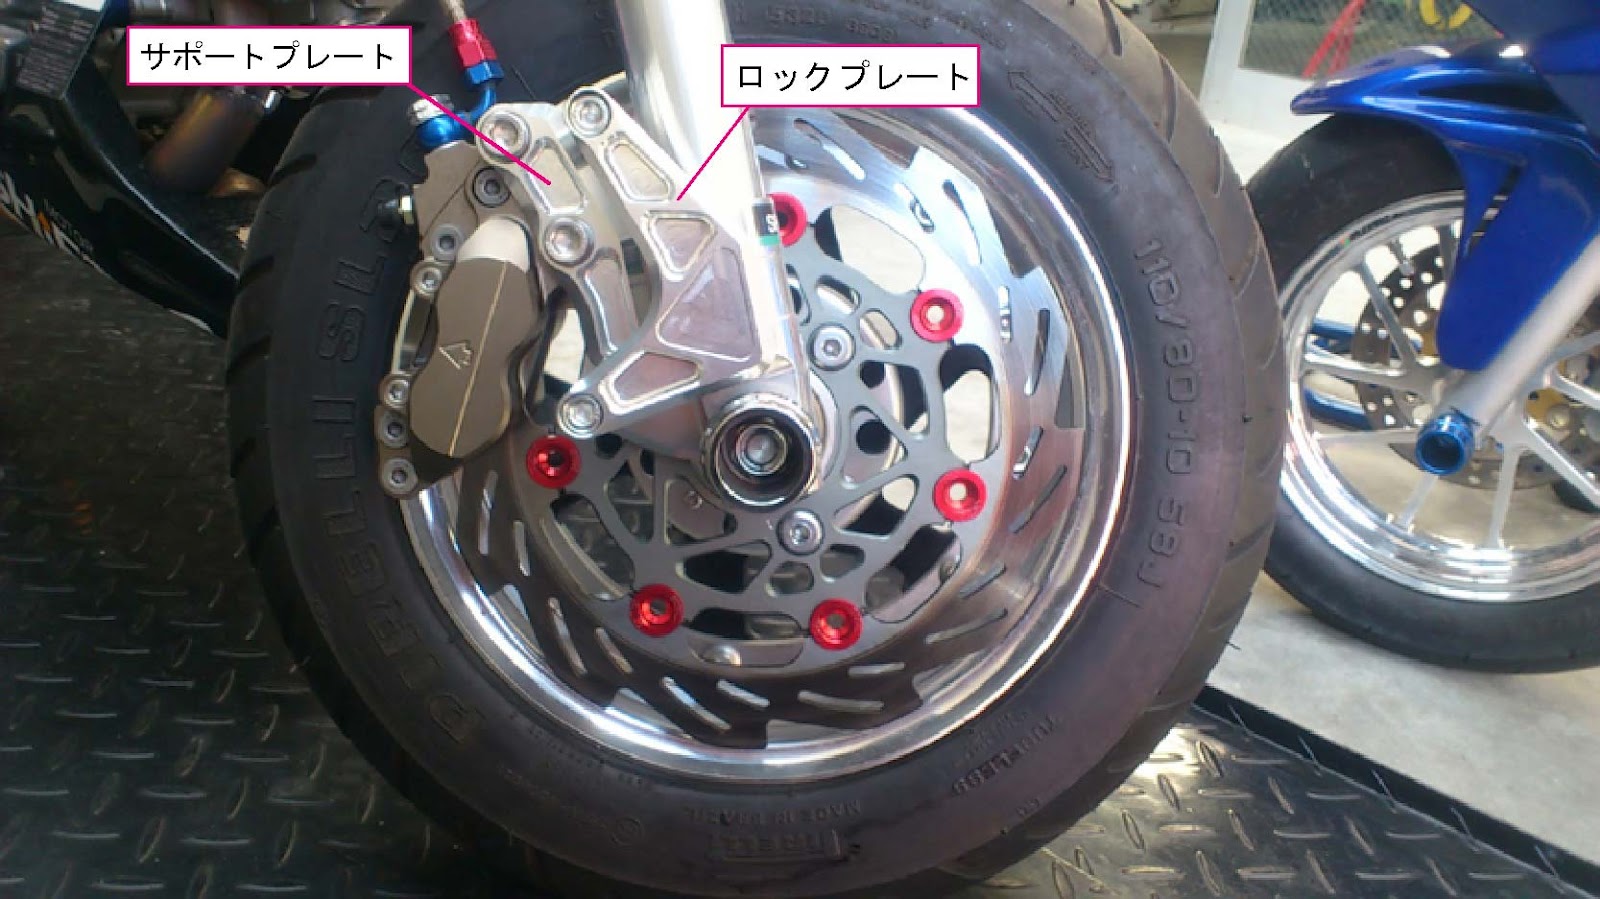 MOTOR SHIFTUP OFFICIAL BLOG: 2/20 240mm フローティング ディスクローター